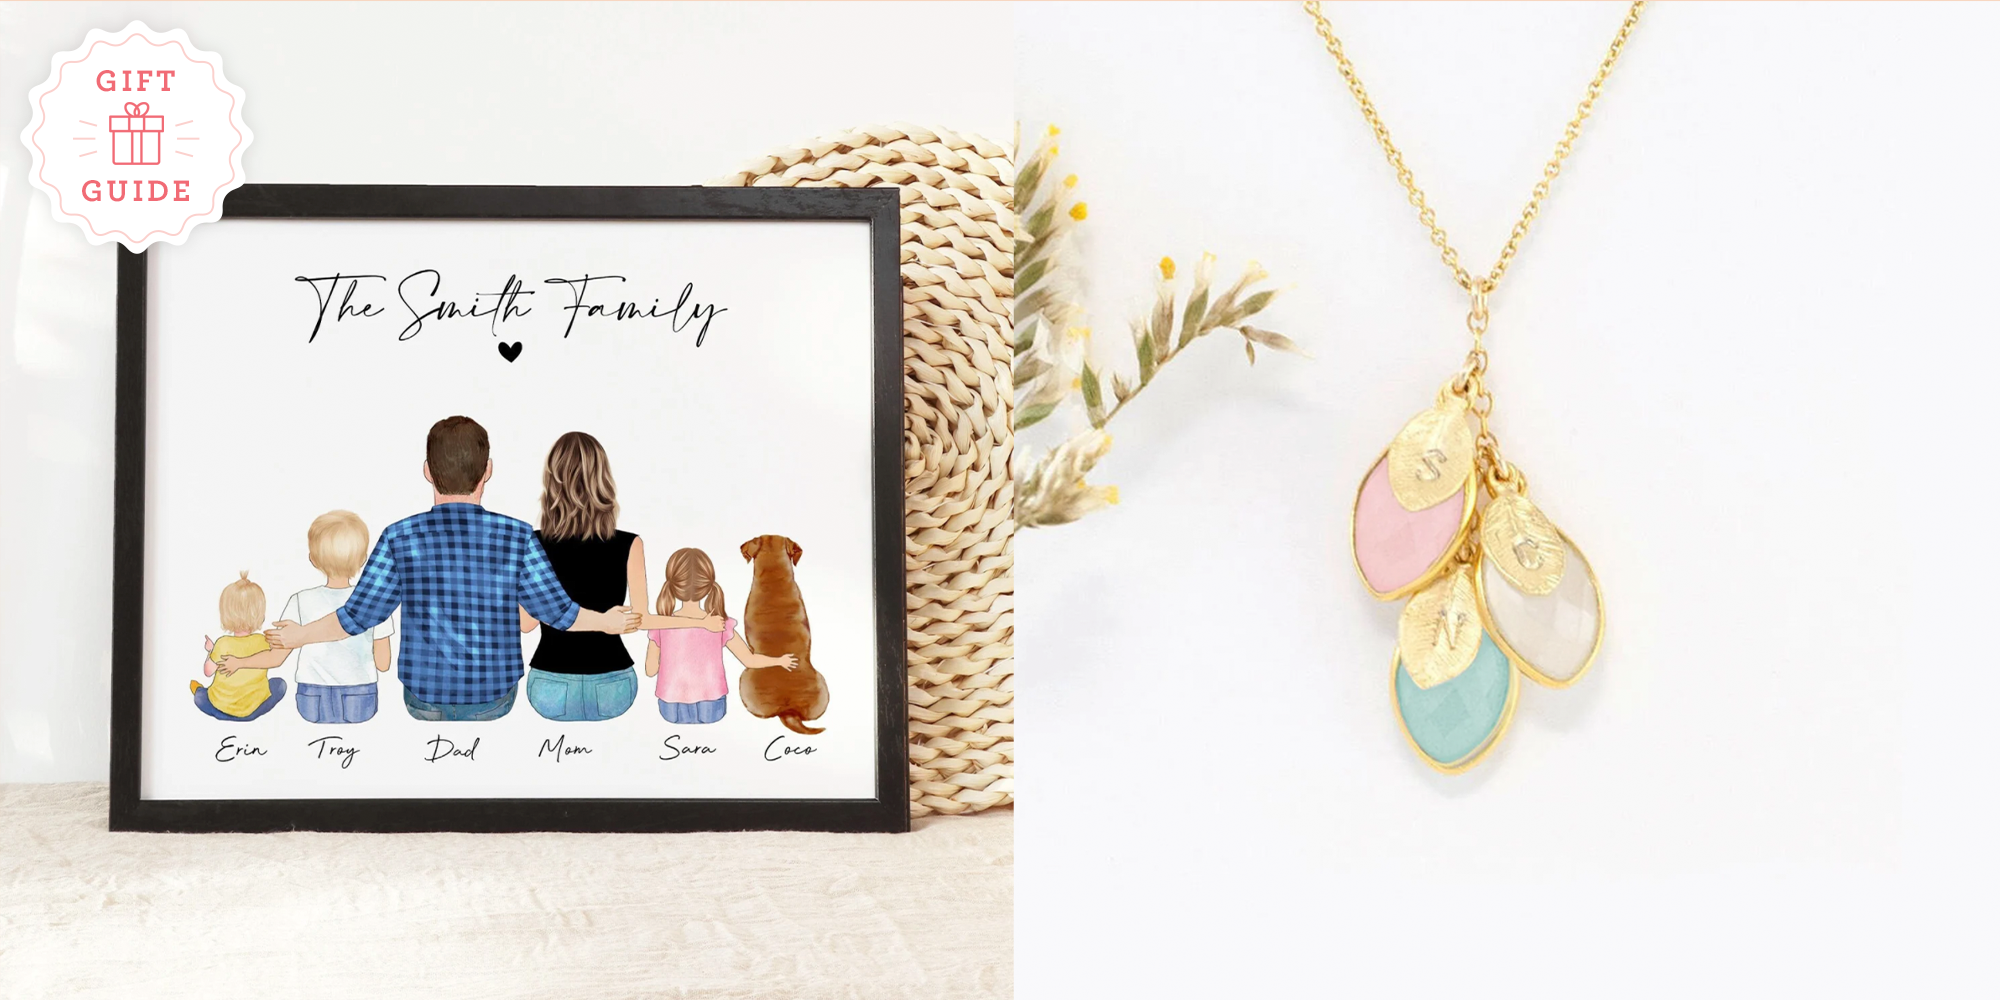 Mother's Day Gifts for Stepmom – My Mindful Gifts